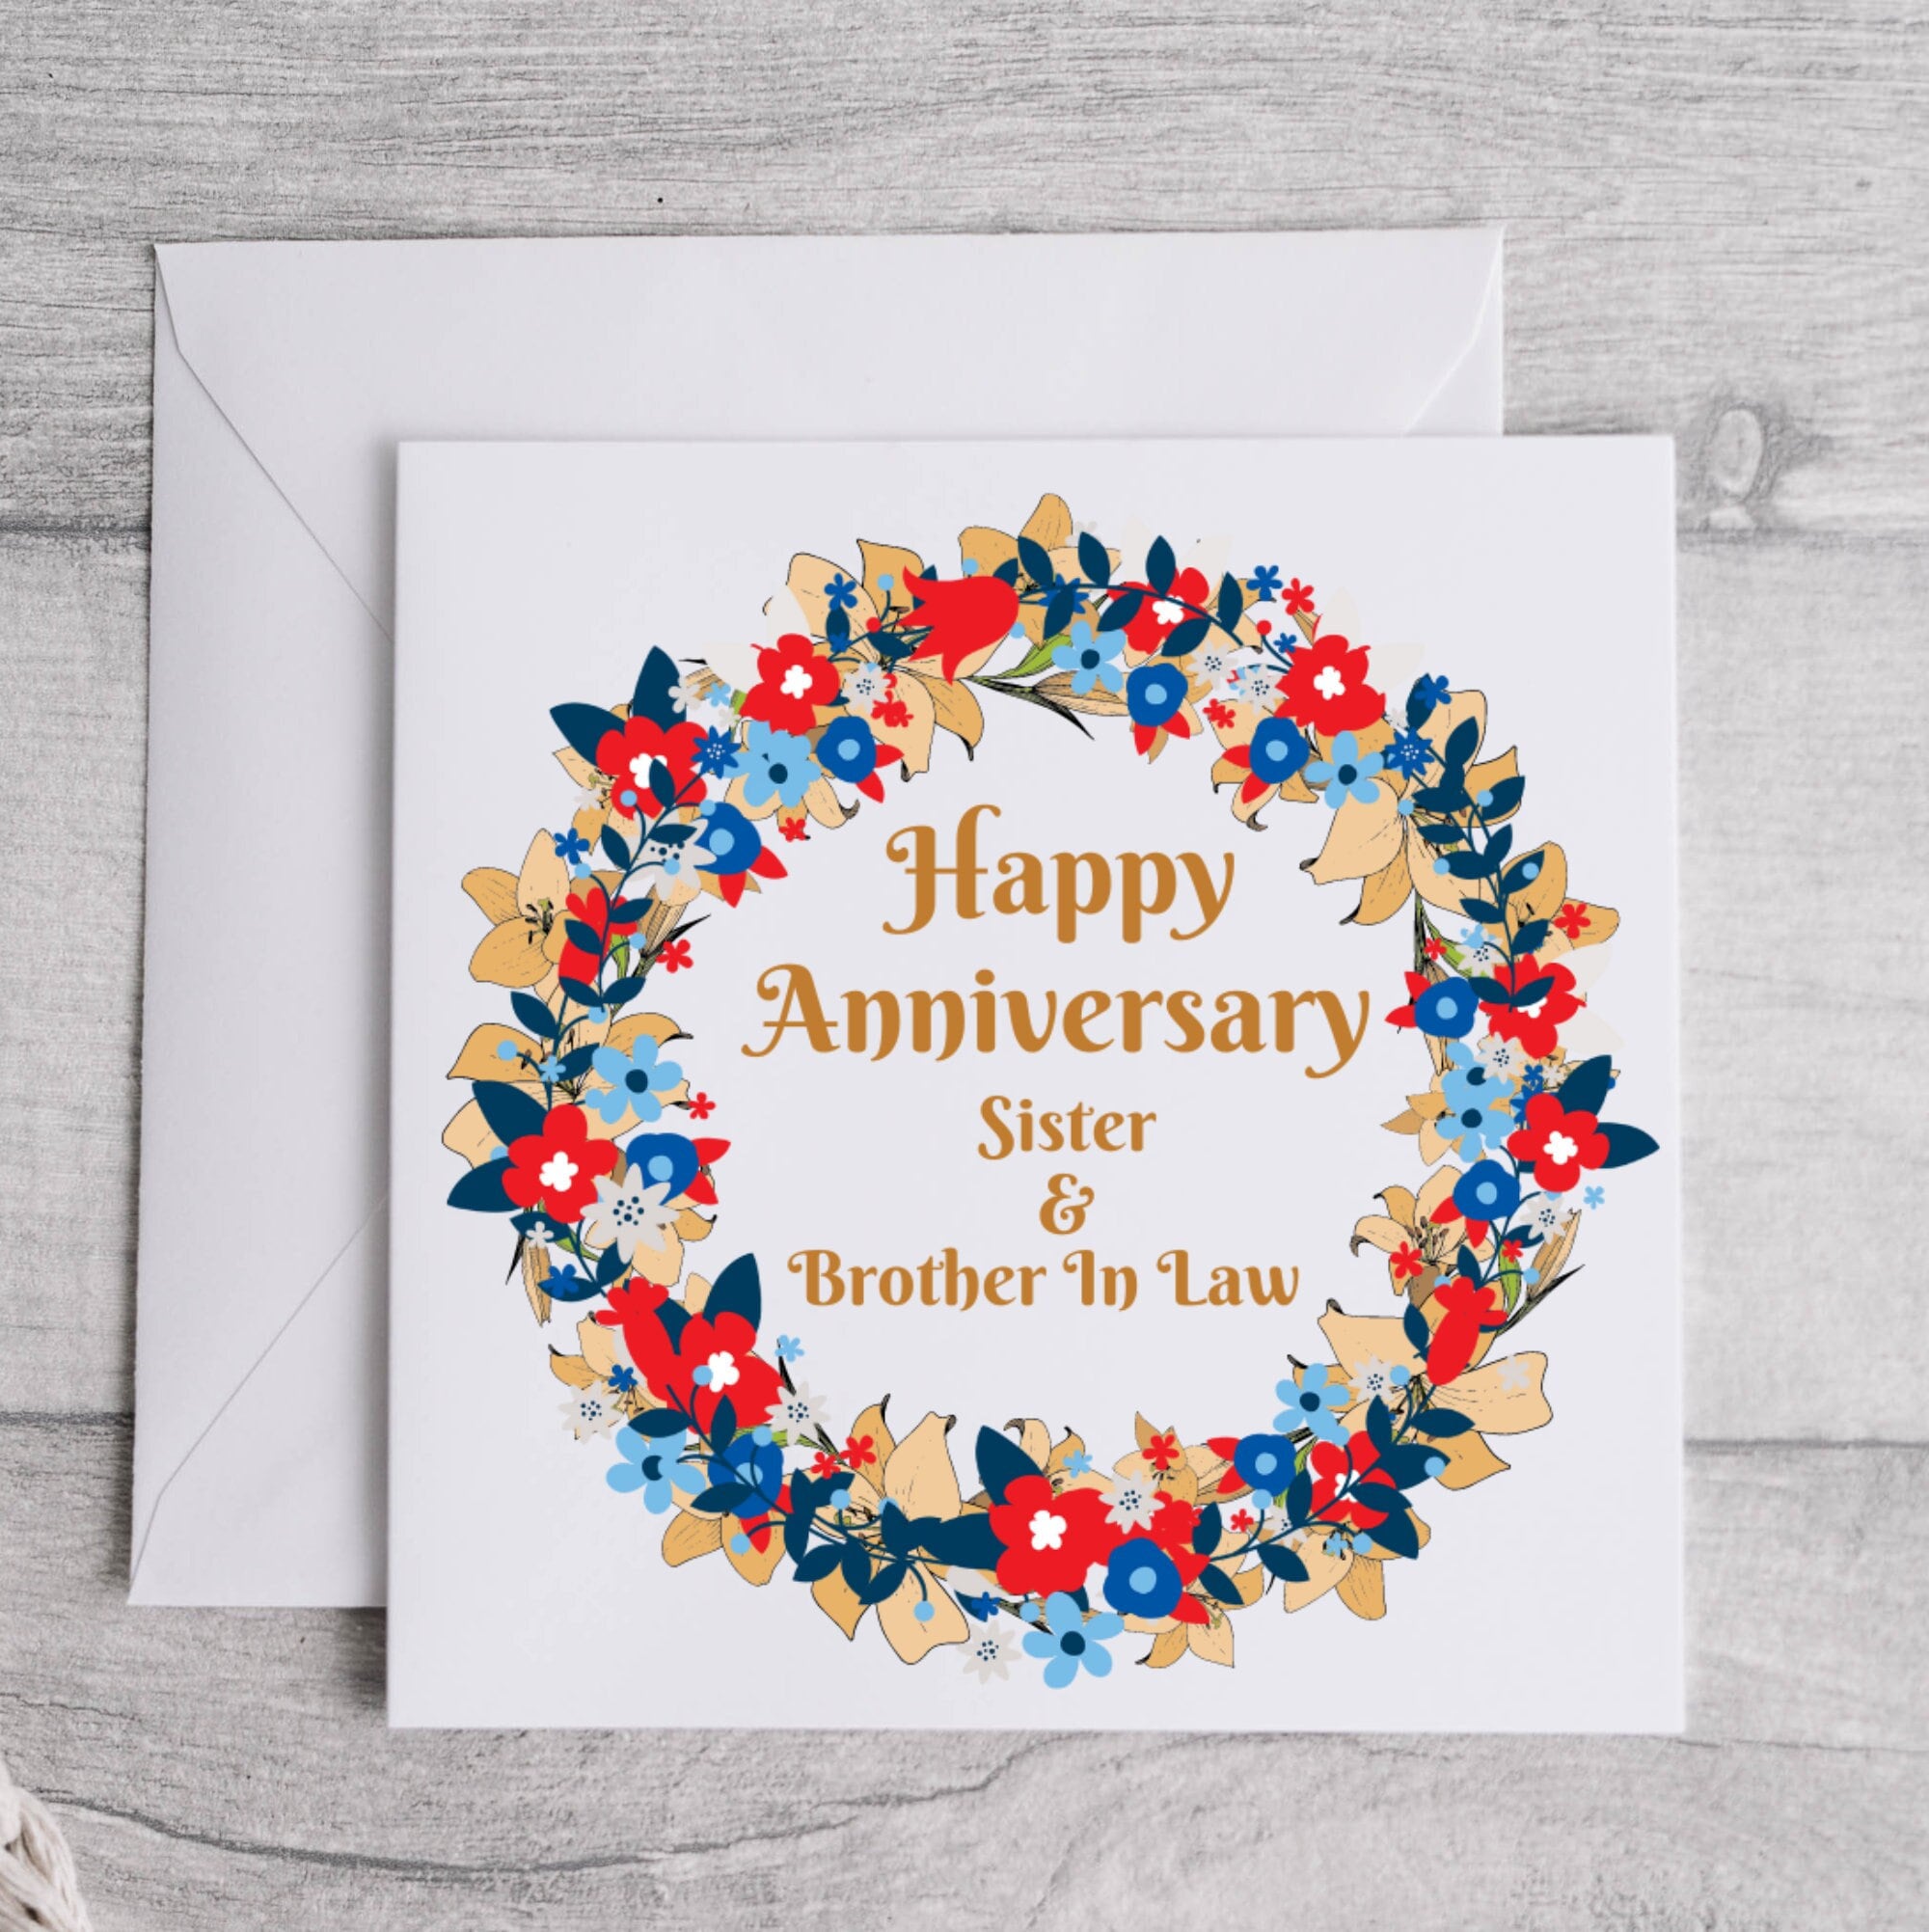 Happy Anniversary Card, Personalized Anniversary Card, Floral Heart Cards -   Sweden